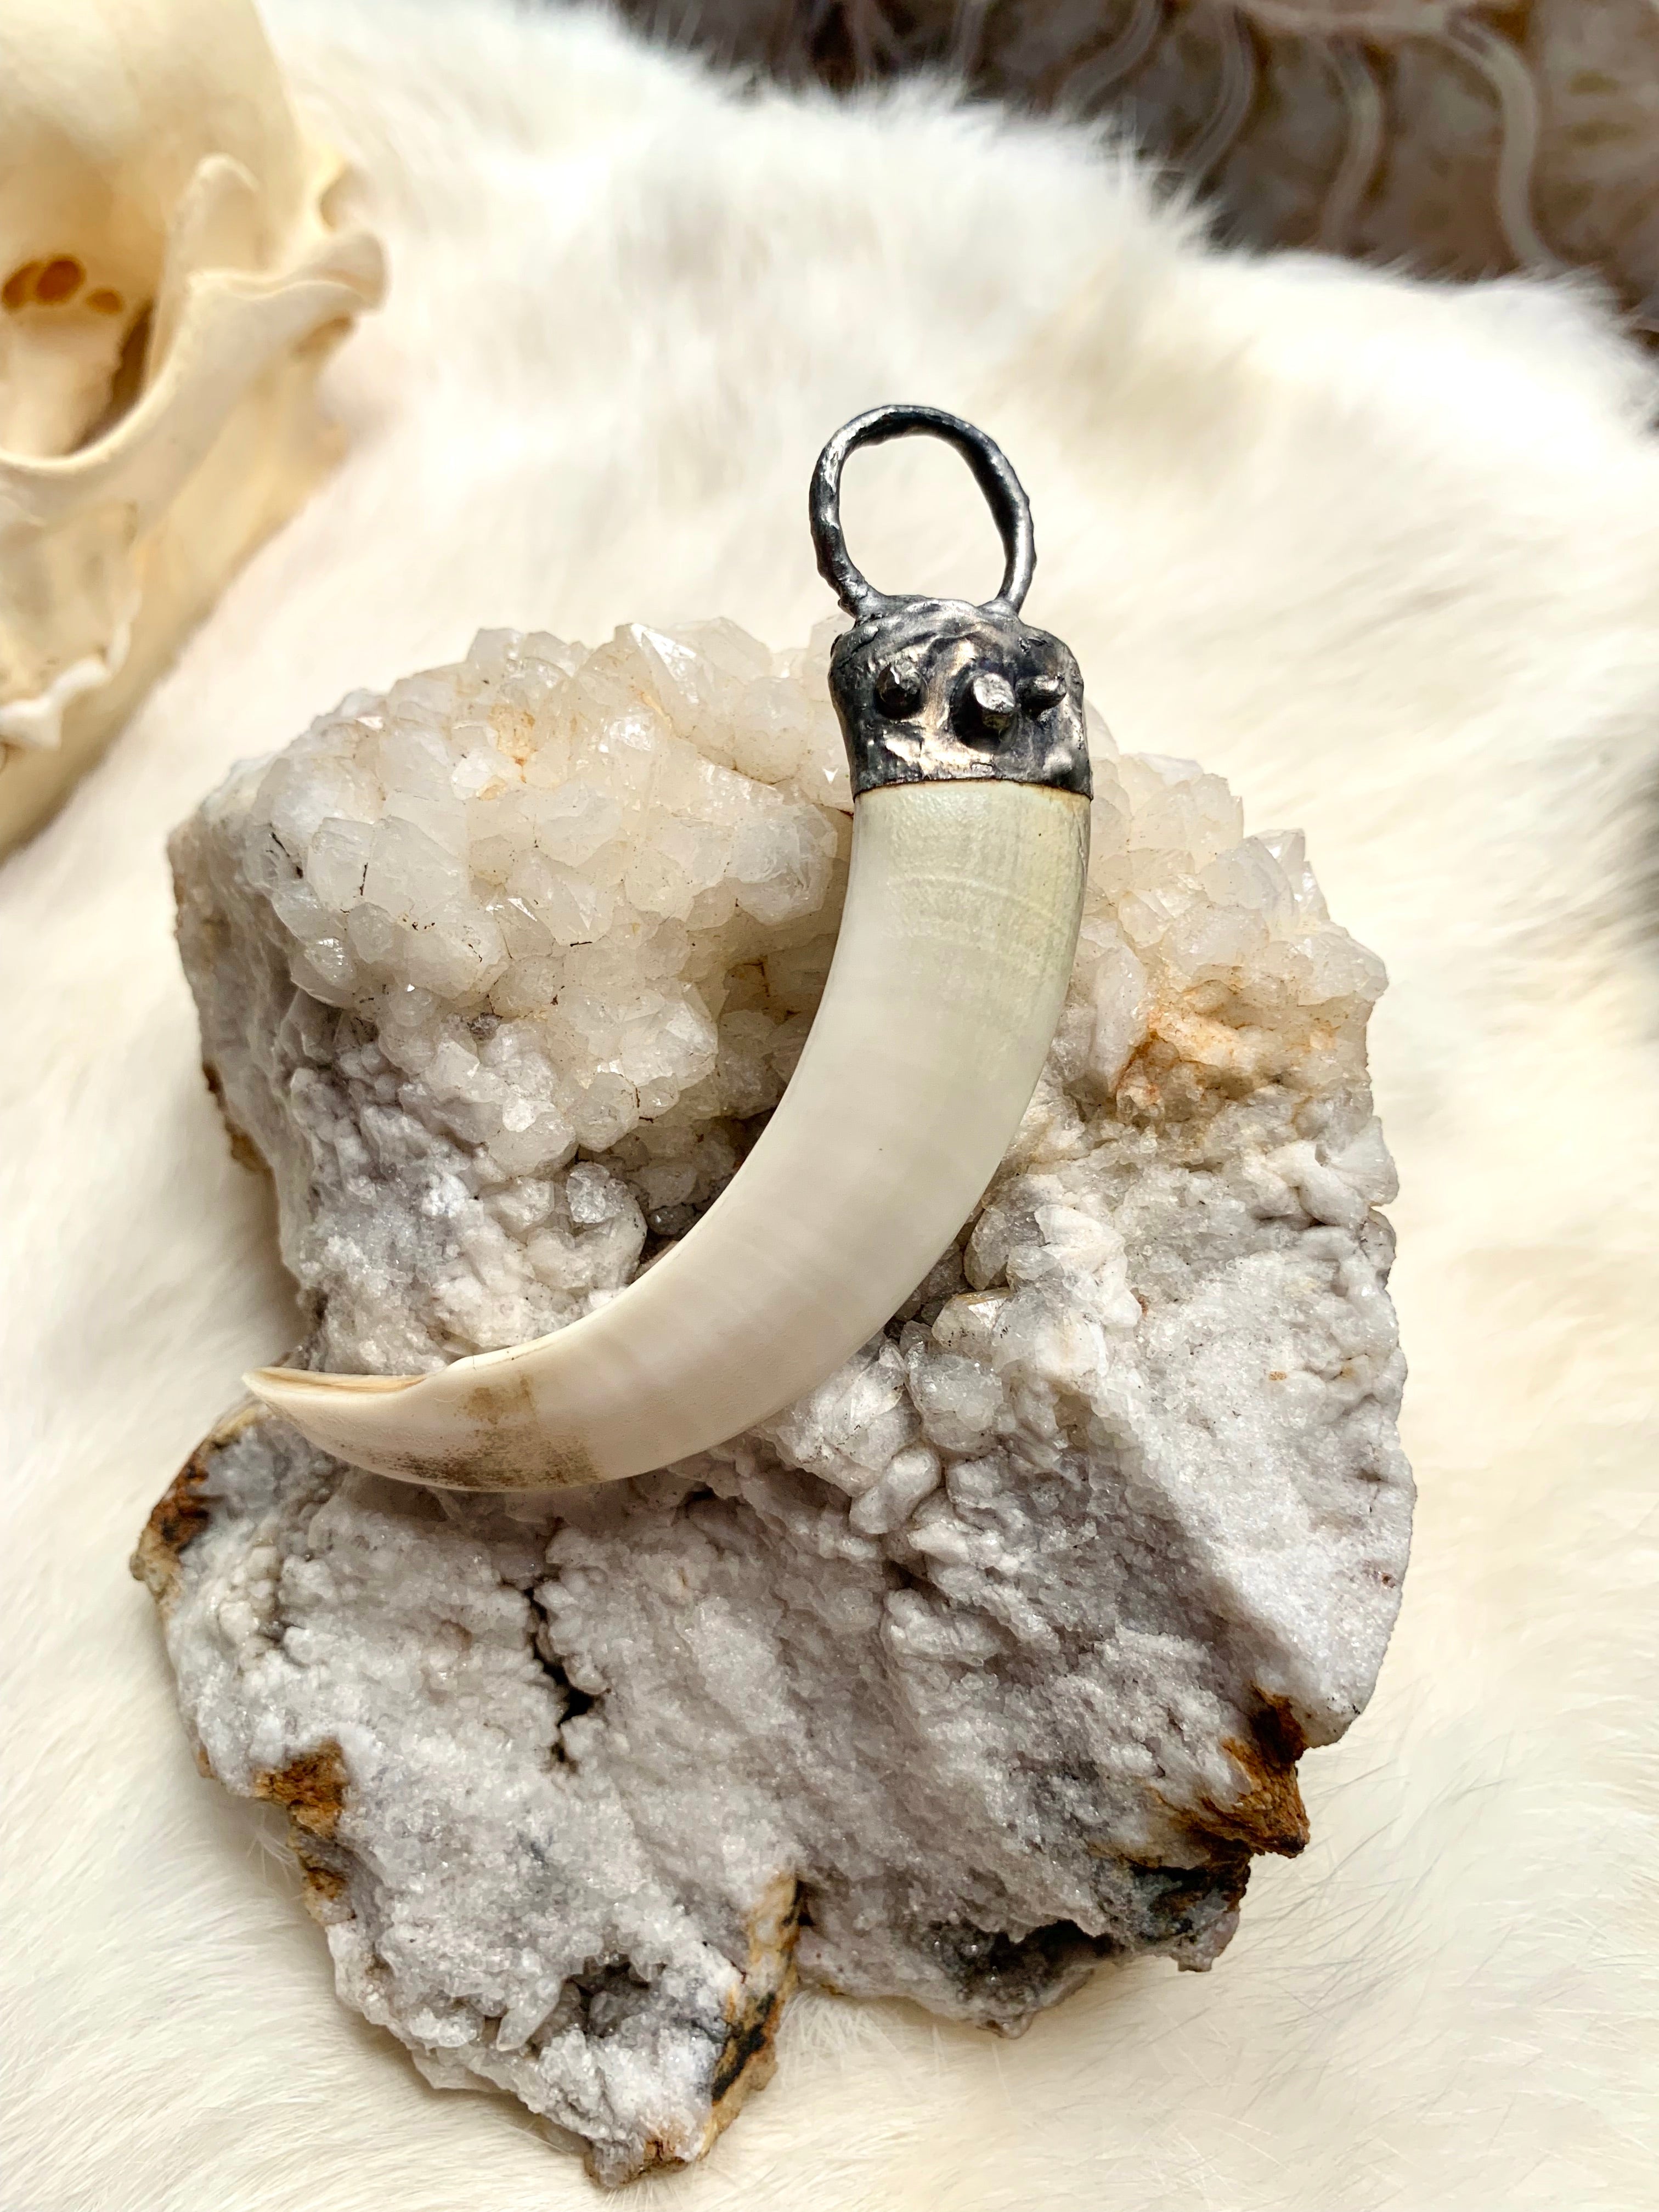 Wild Boar Tusk This Is a Warning Necklace